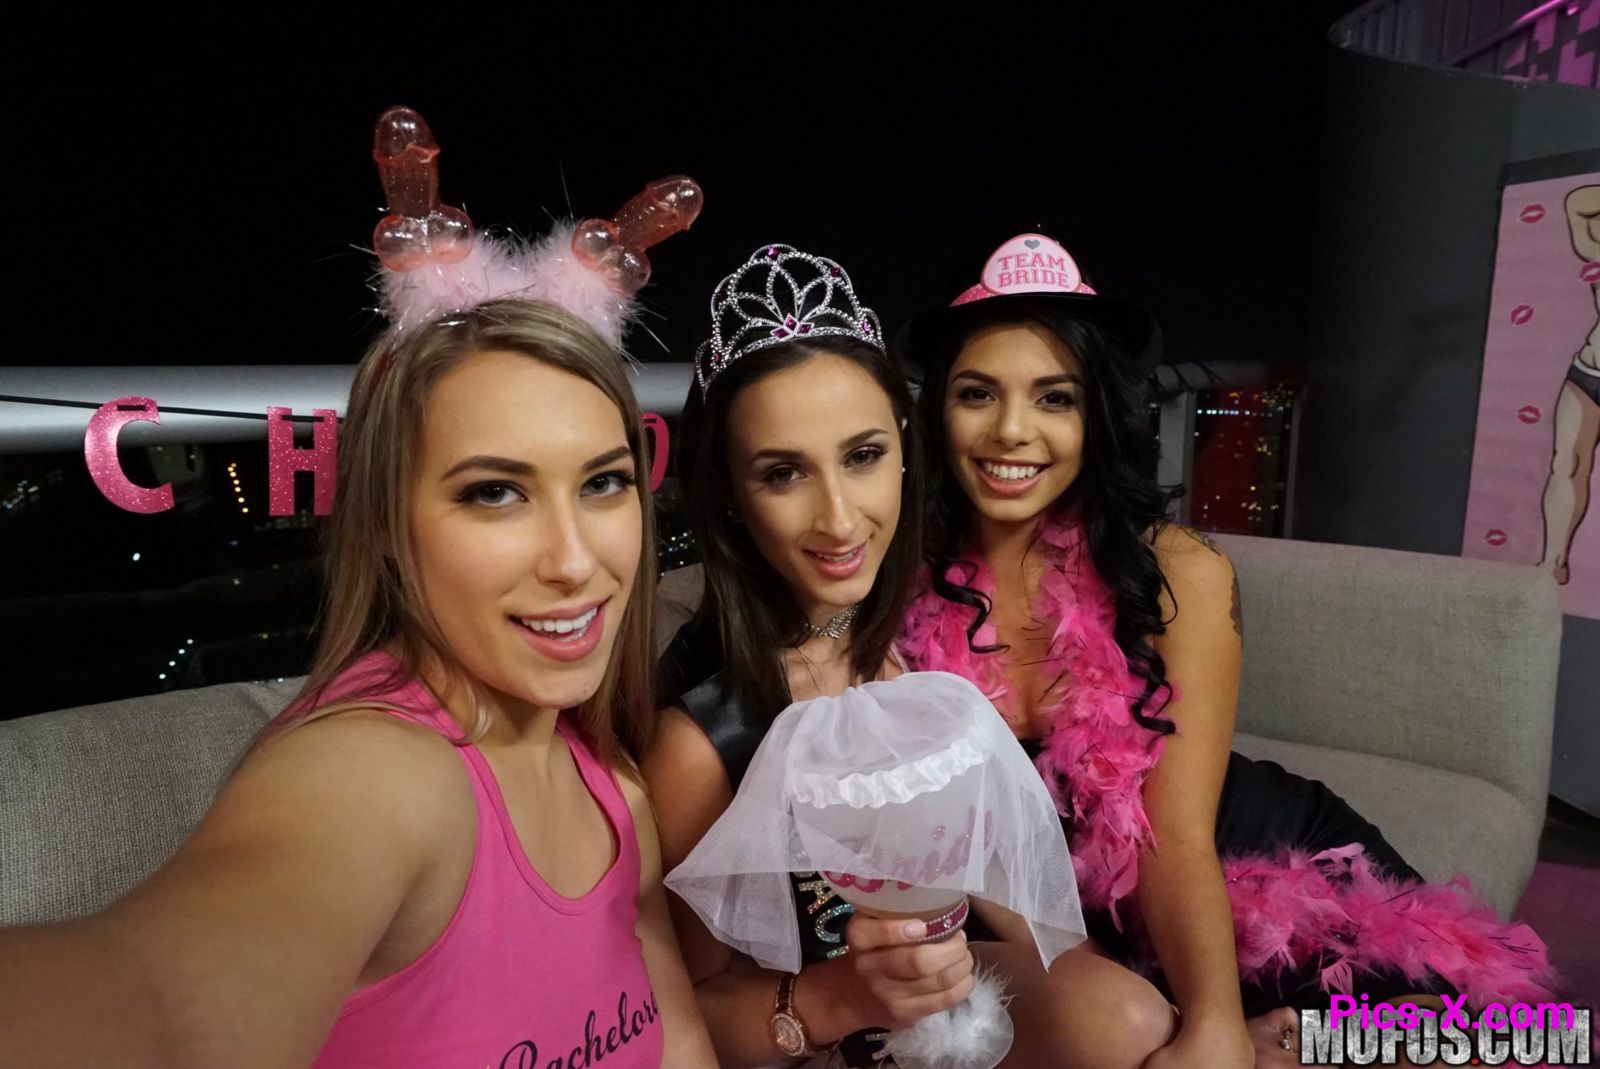 Bachelorette Party Threesome - Share My BF - Image 1